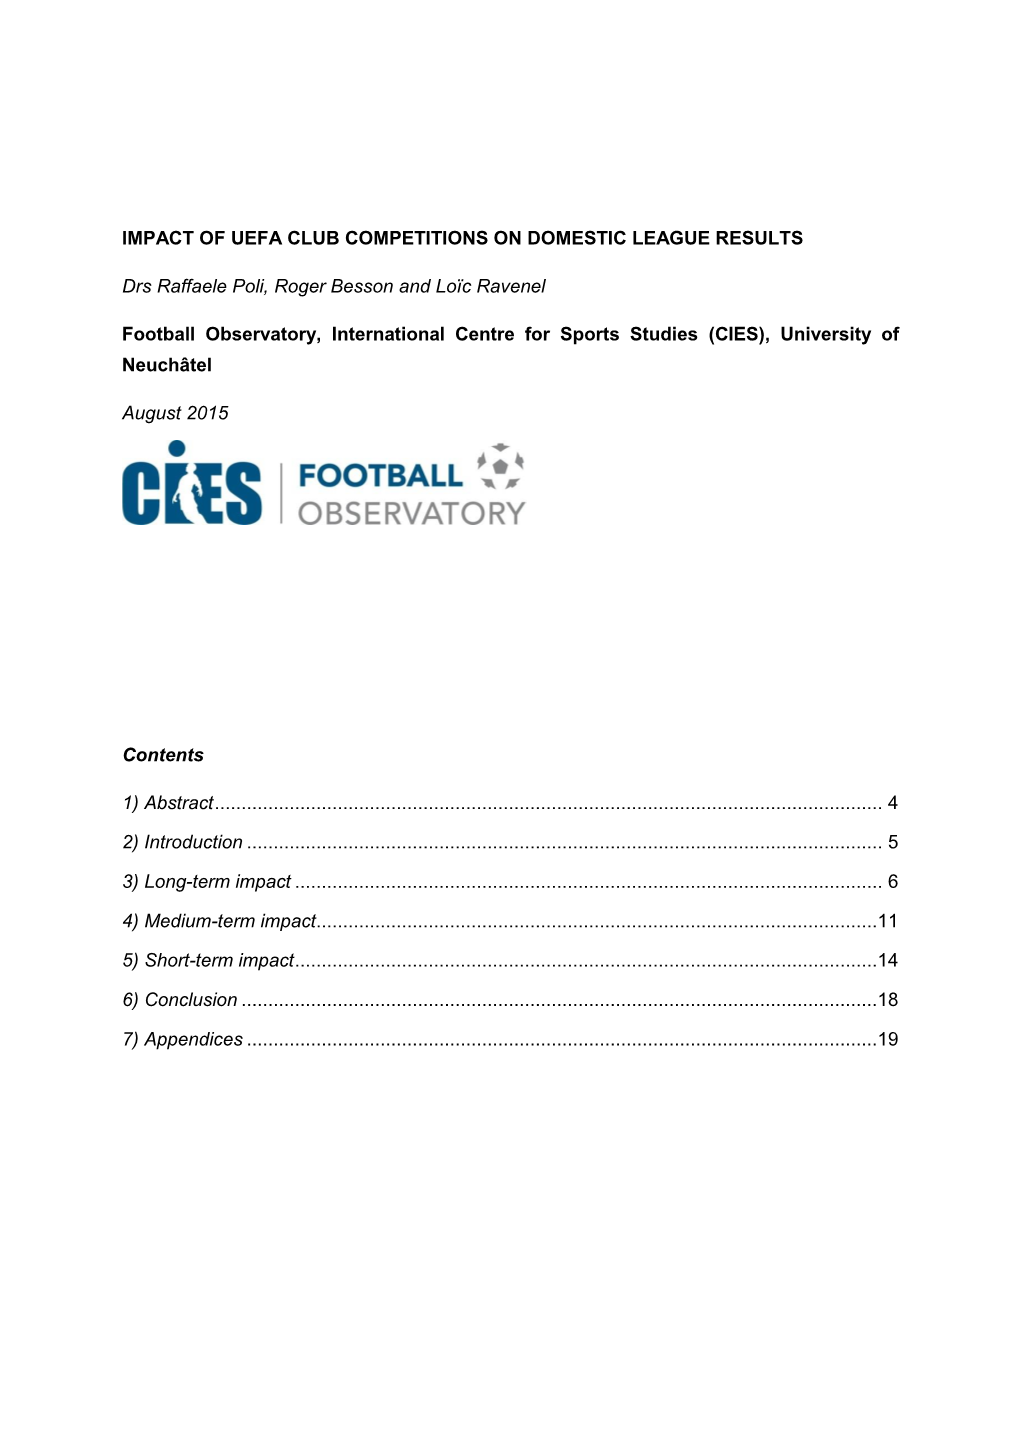 Impact of Uefa Club Competitions on Domestic League Results